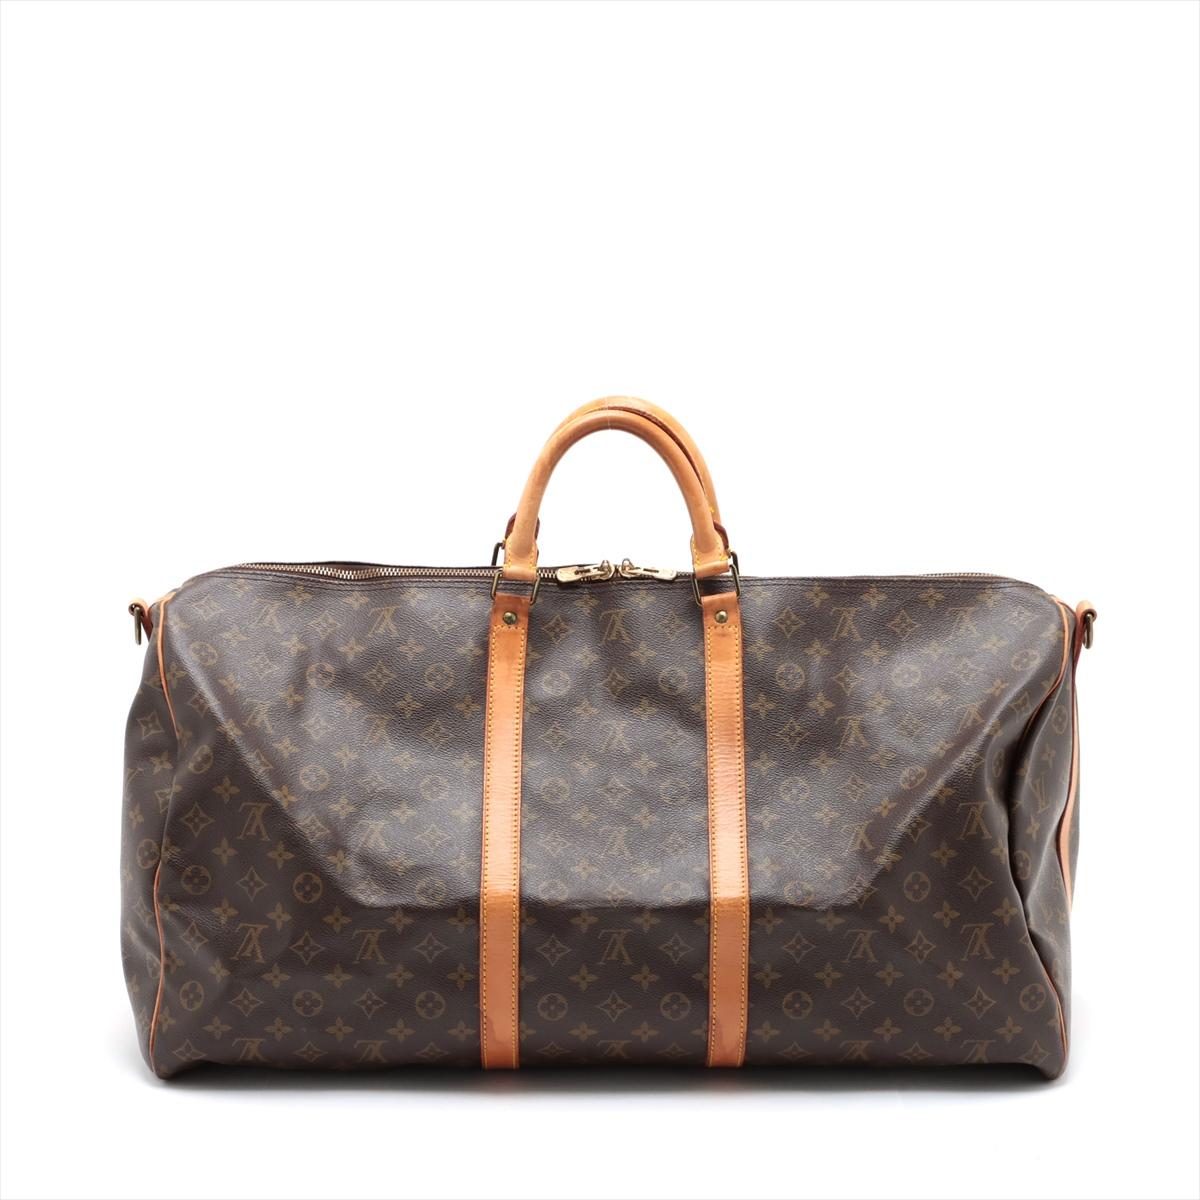 The Louis Vuitton Monogram Keepall 60 is a spacious and iconic travel bag that embodies the timeless elegance and craftsmanship synonymous with the Louis Vuitton brand. Crafted from the iconic Monogram canvas, the bag features the instantly